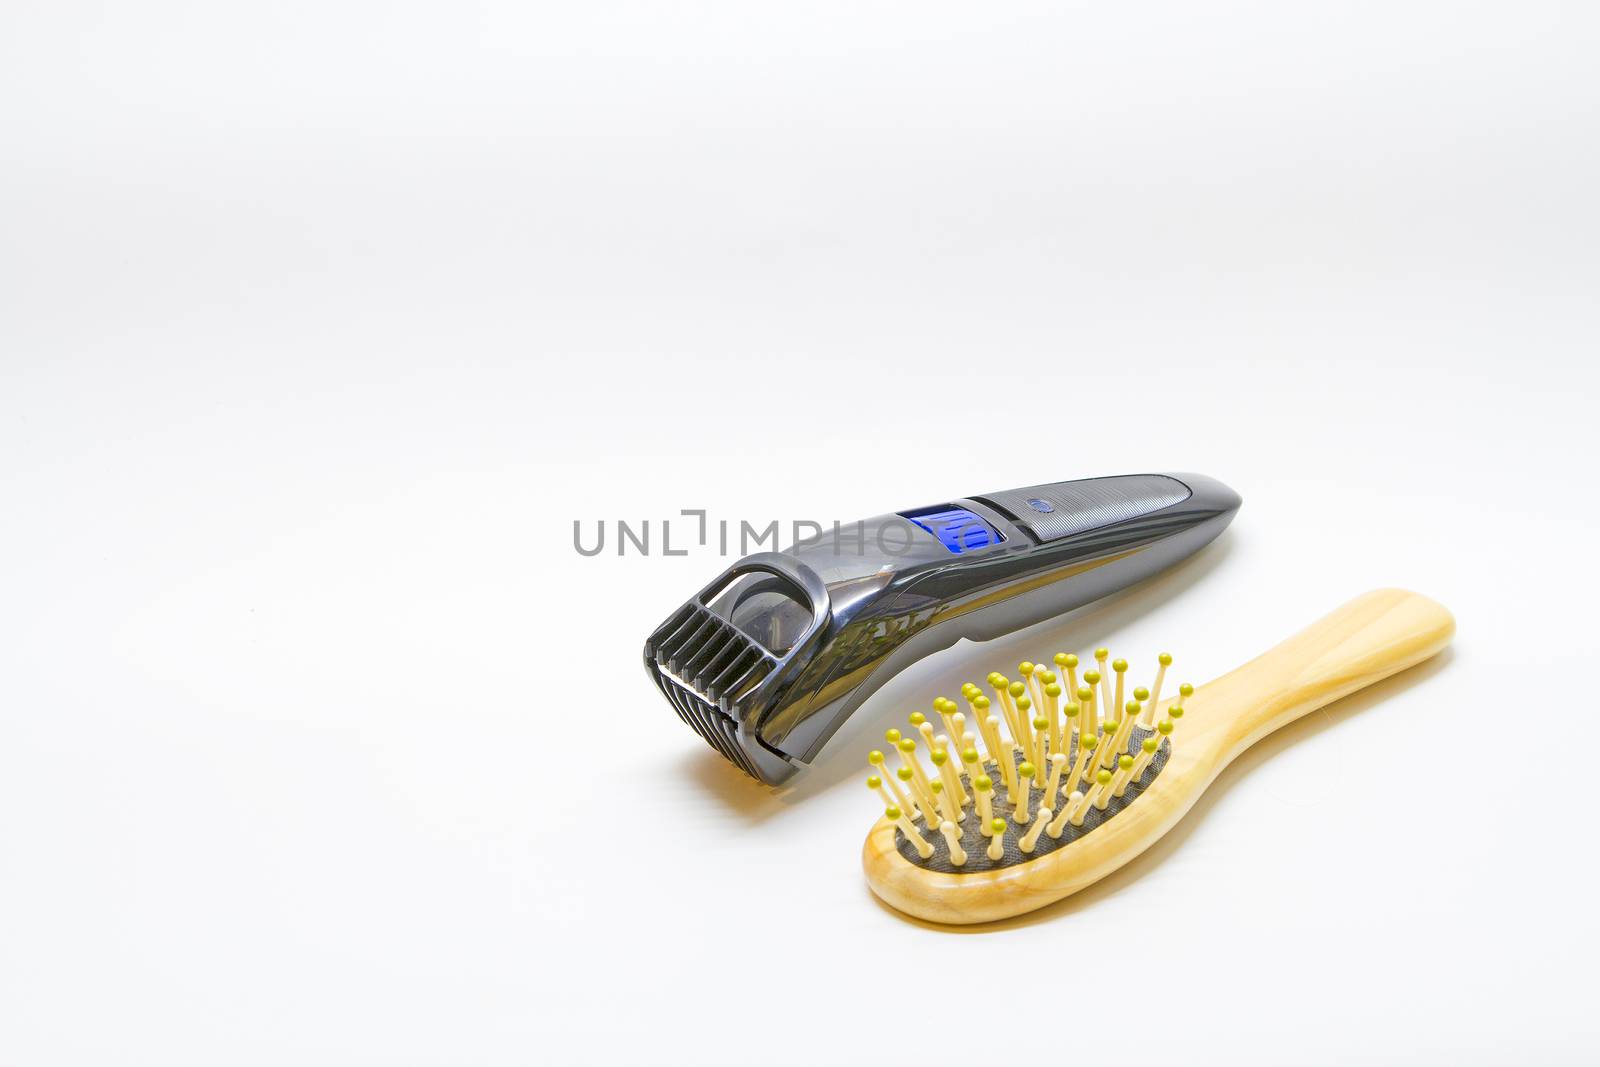 Hair brush comb with scraping hair and clipper on a white background.